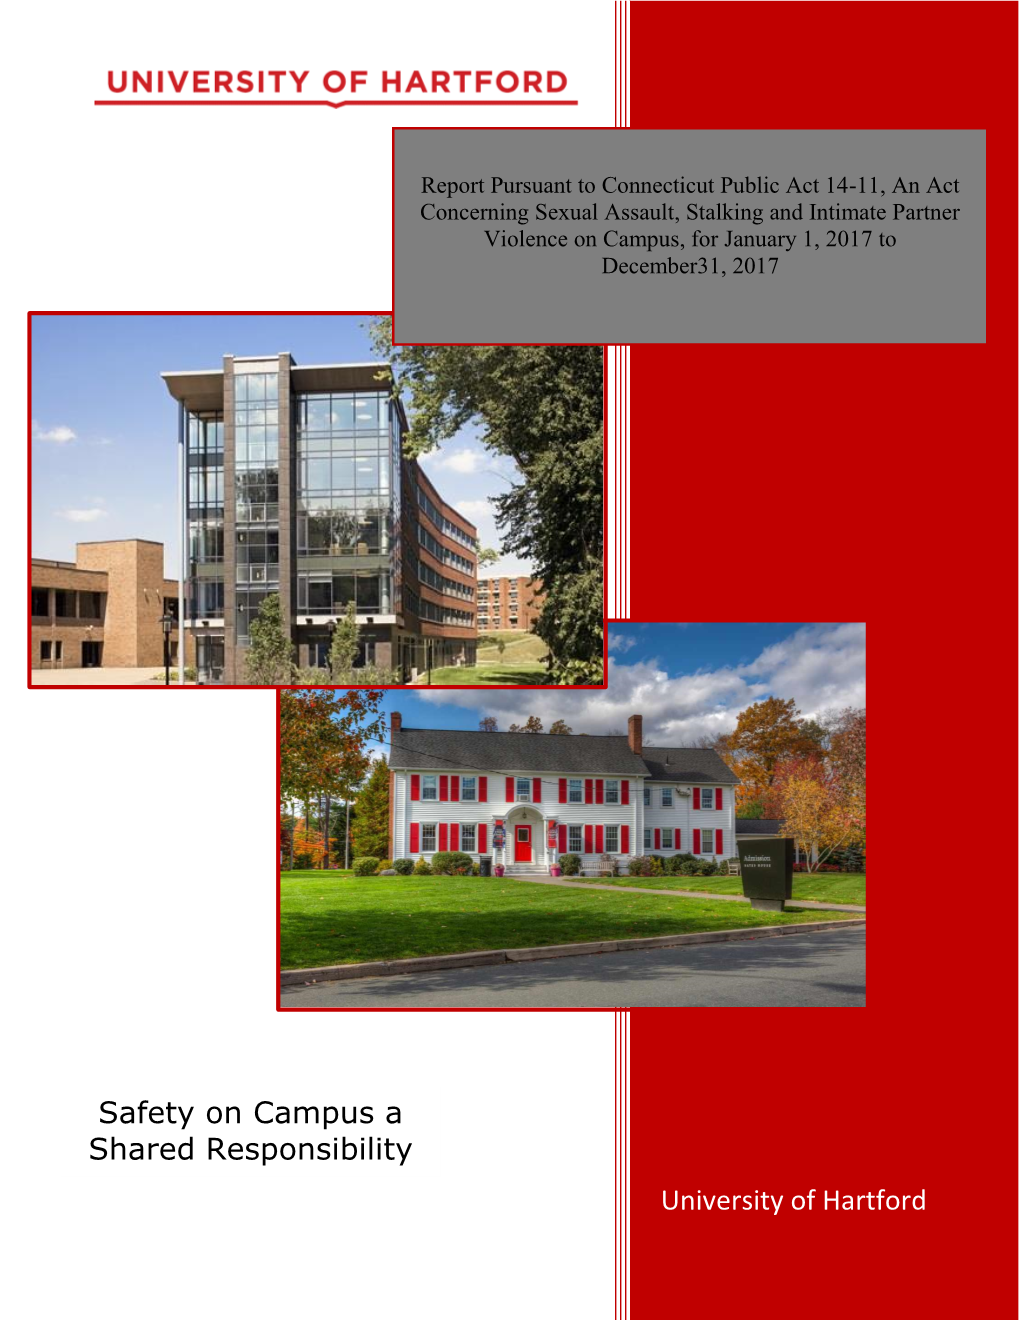 University of Hartford Table of Contents